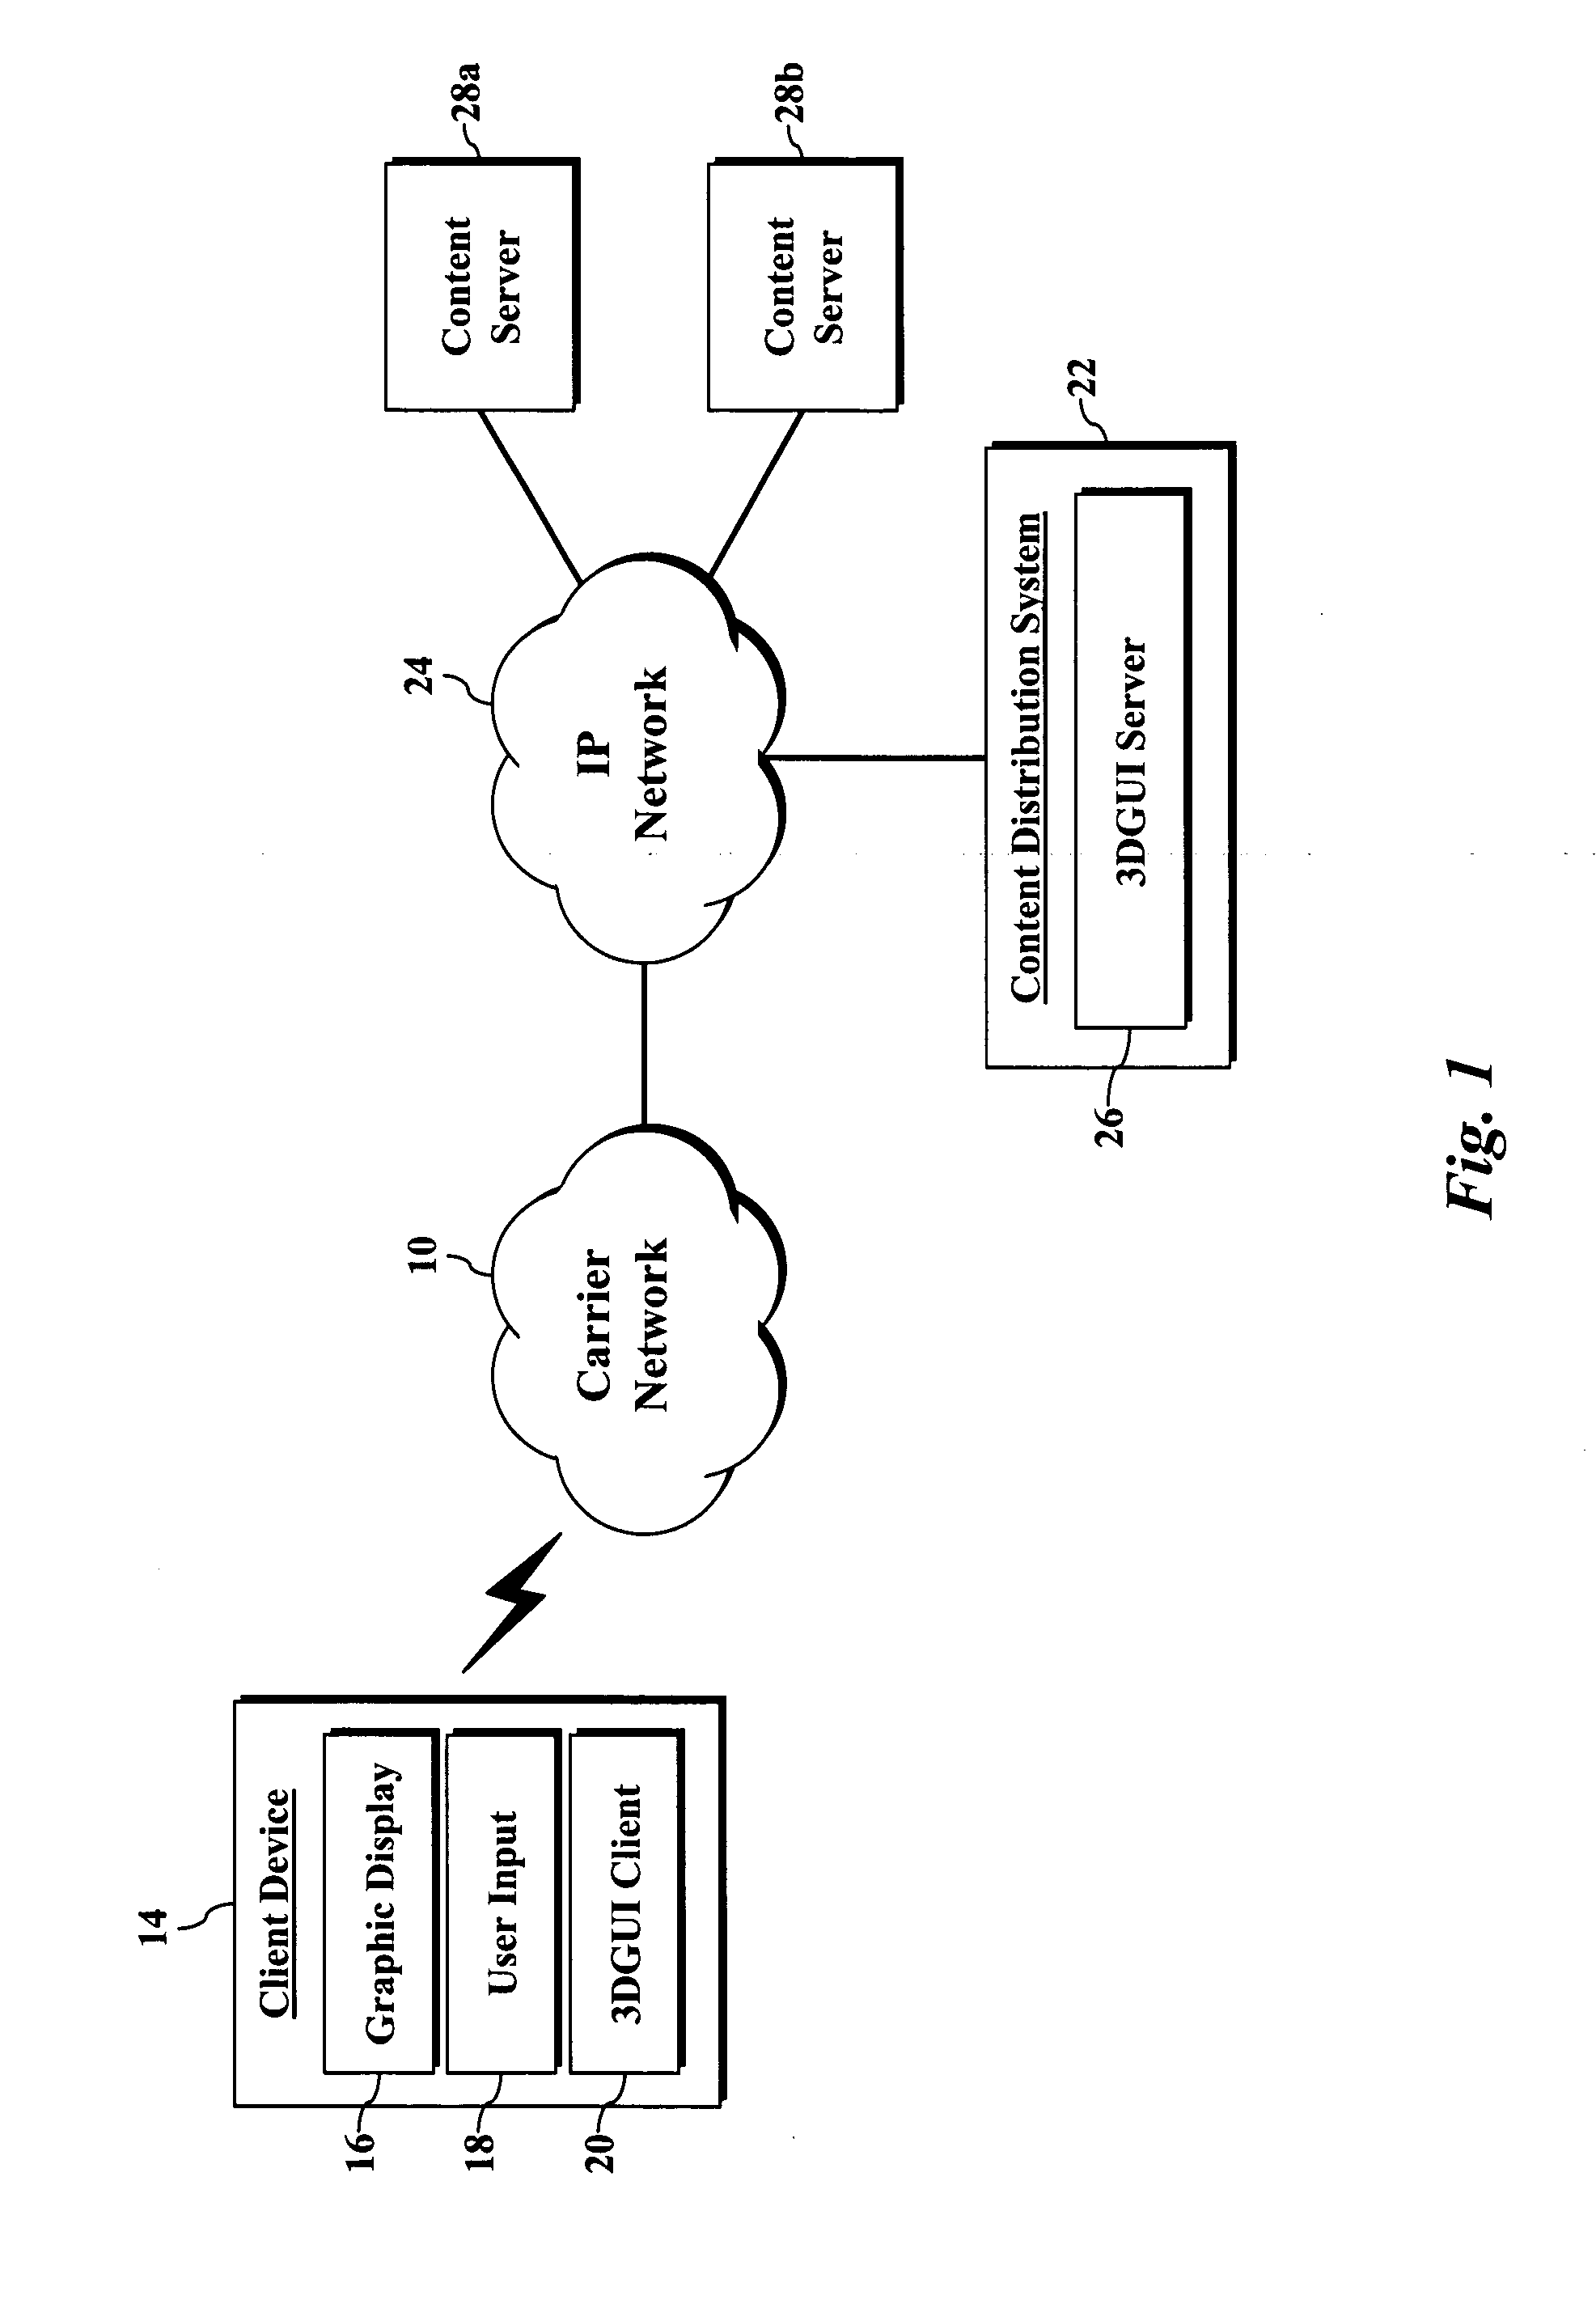 Three-dimensional graphical user interface